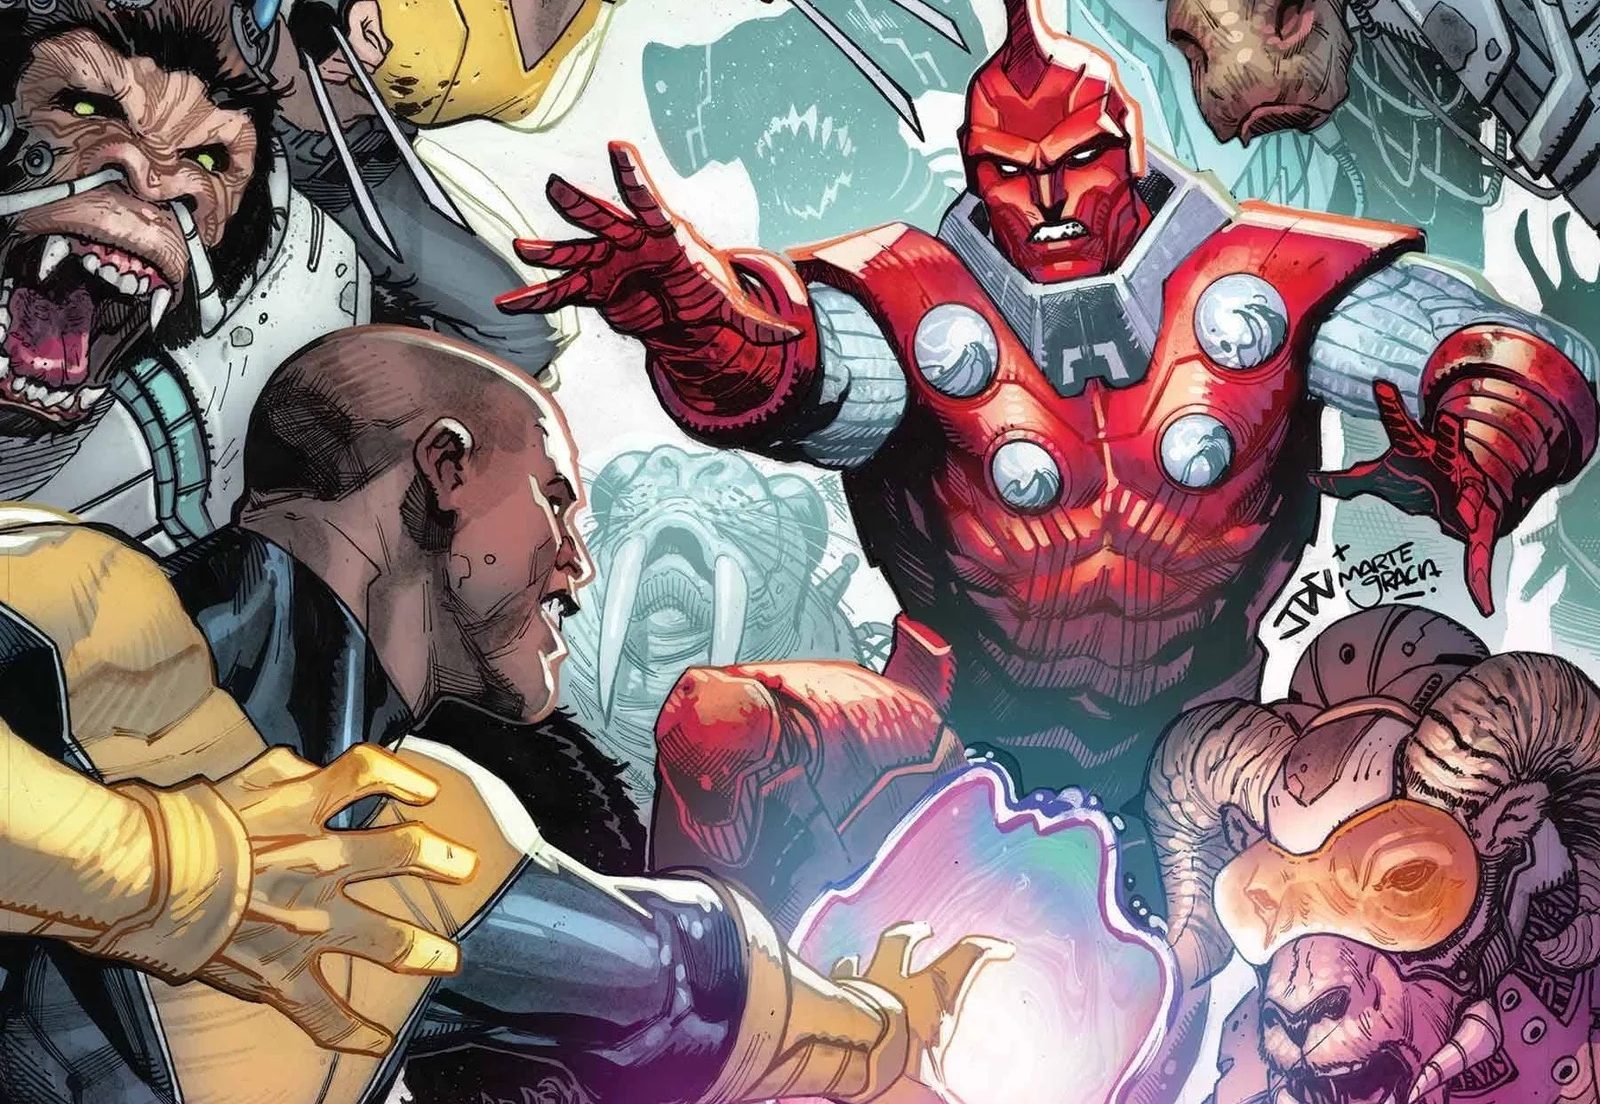 Synch and Talon fight the High Evolutionary and his Ani-Men on Cropped Cover of X-Men #30